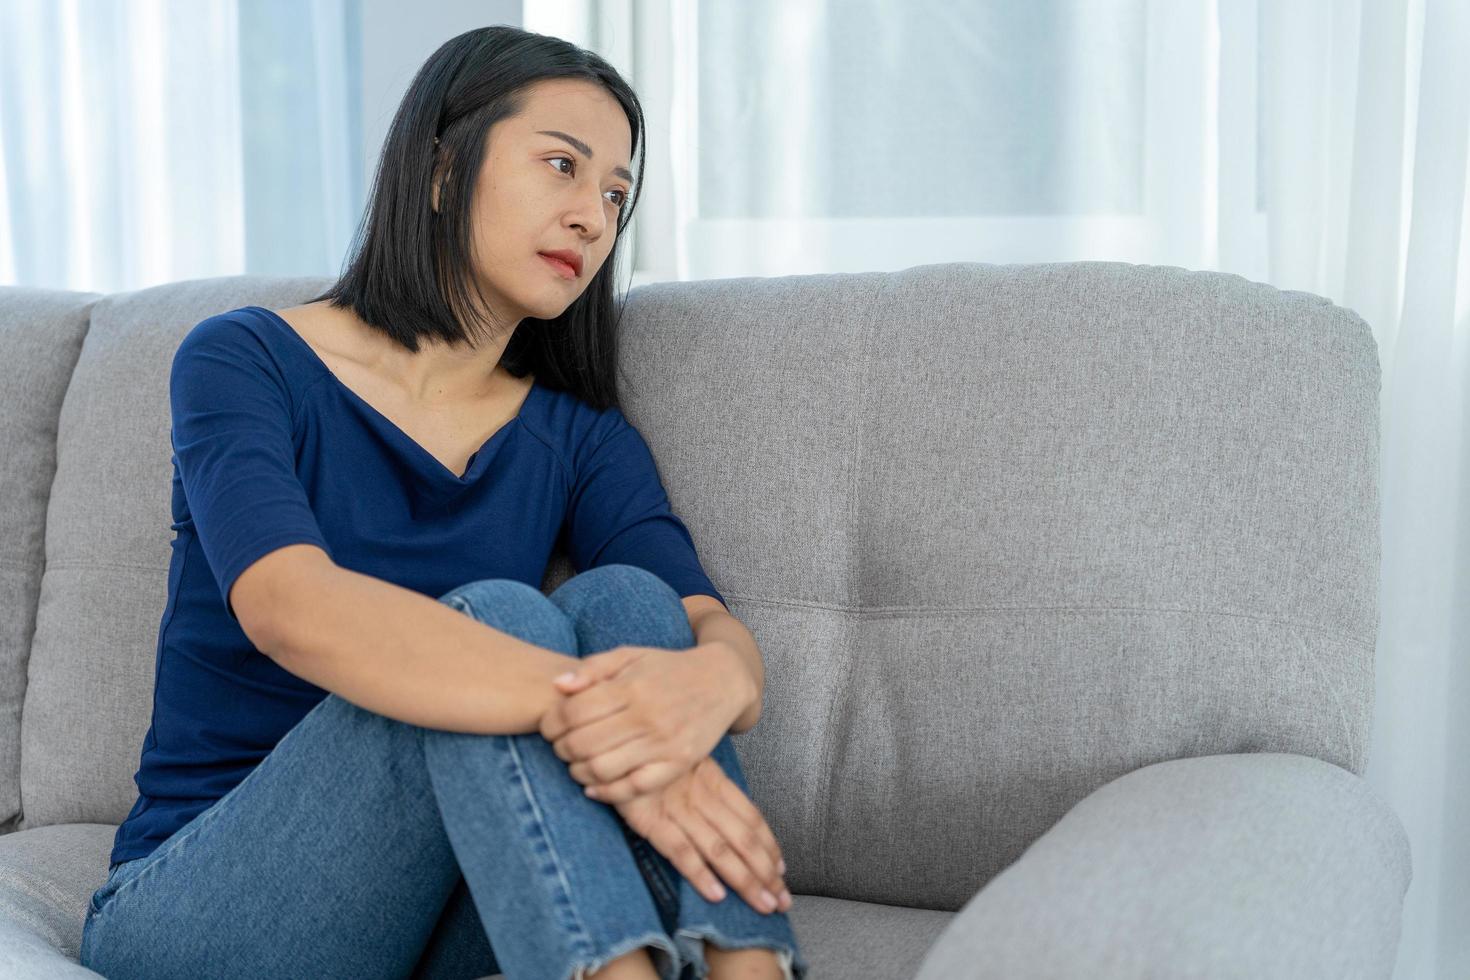 Unhappy asian woman girl disappointed, sad about problem in home alone, feel lonely, Stressed, suffering from bad relationship, break up, divorce, female confused, depression mental health, lone photo